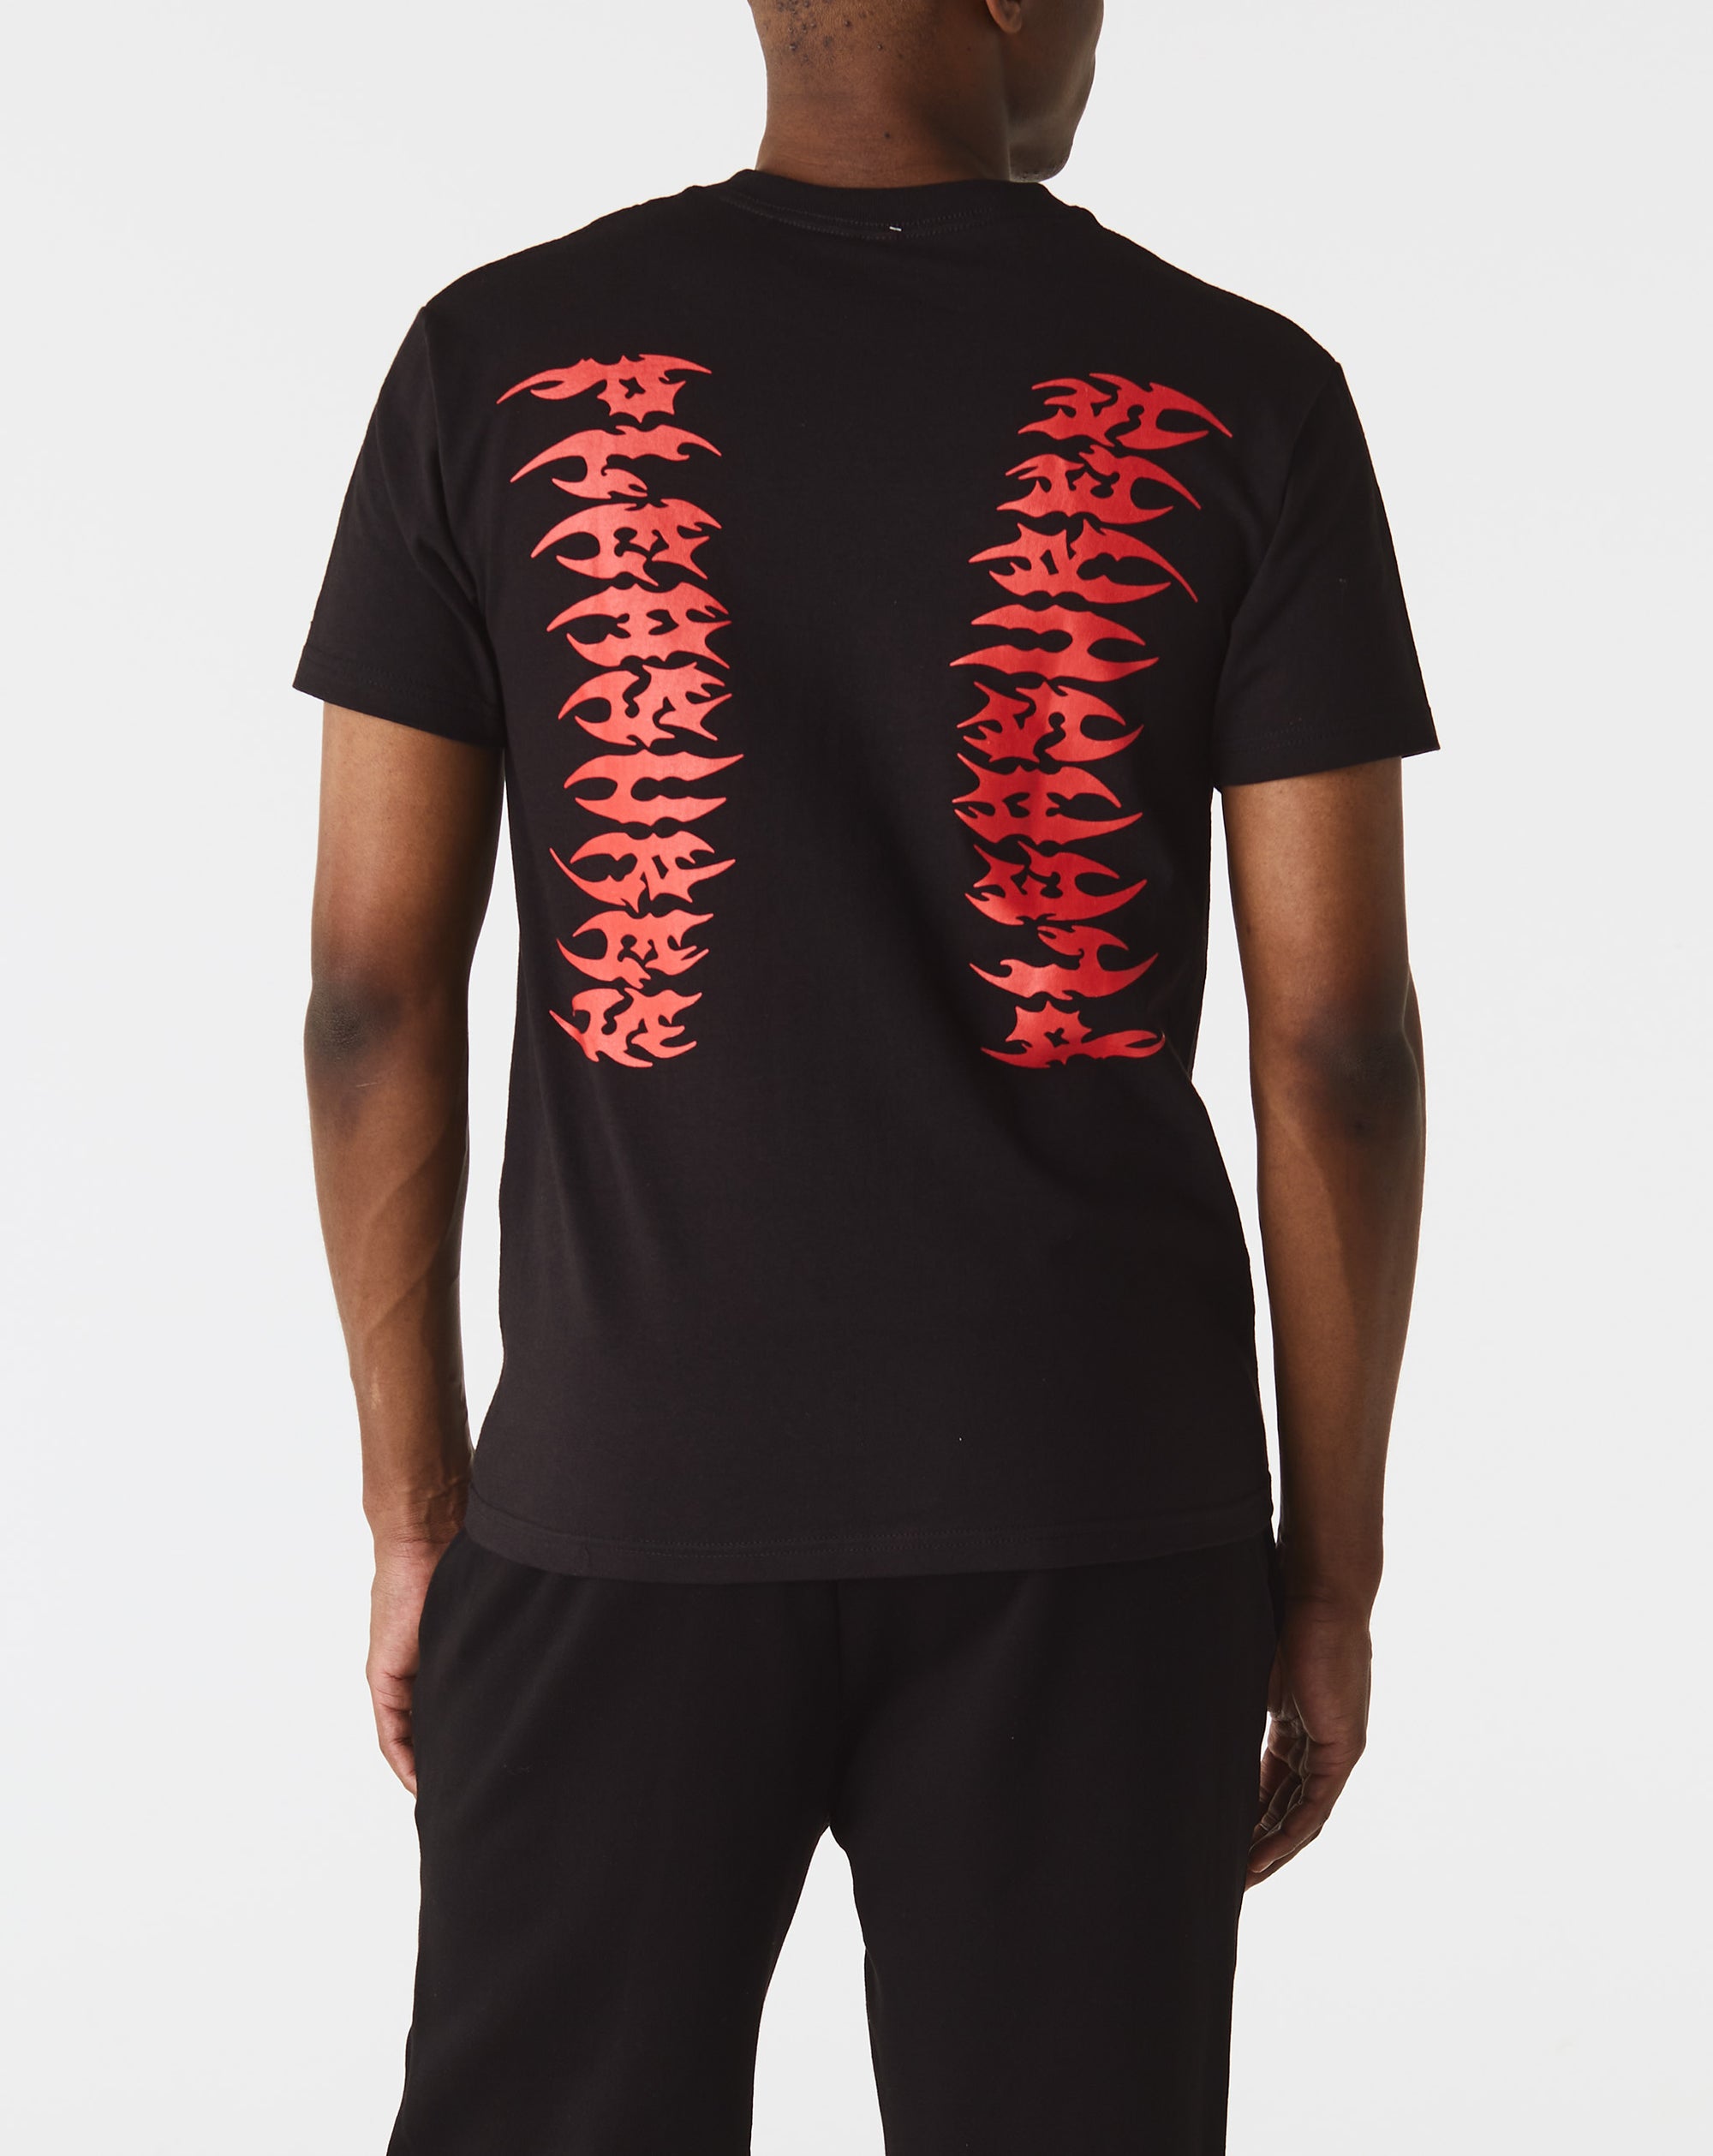 Pleasures Ripped T-Shirt - Rule of Next Apparel